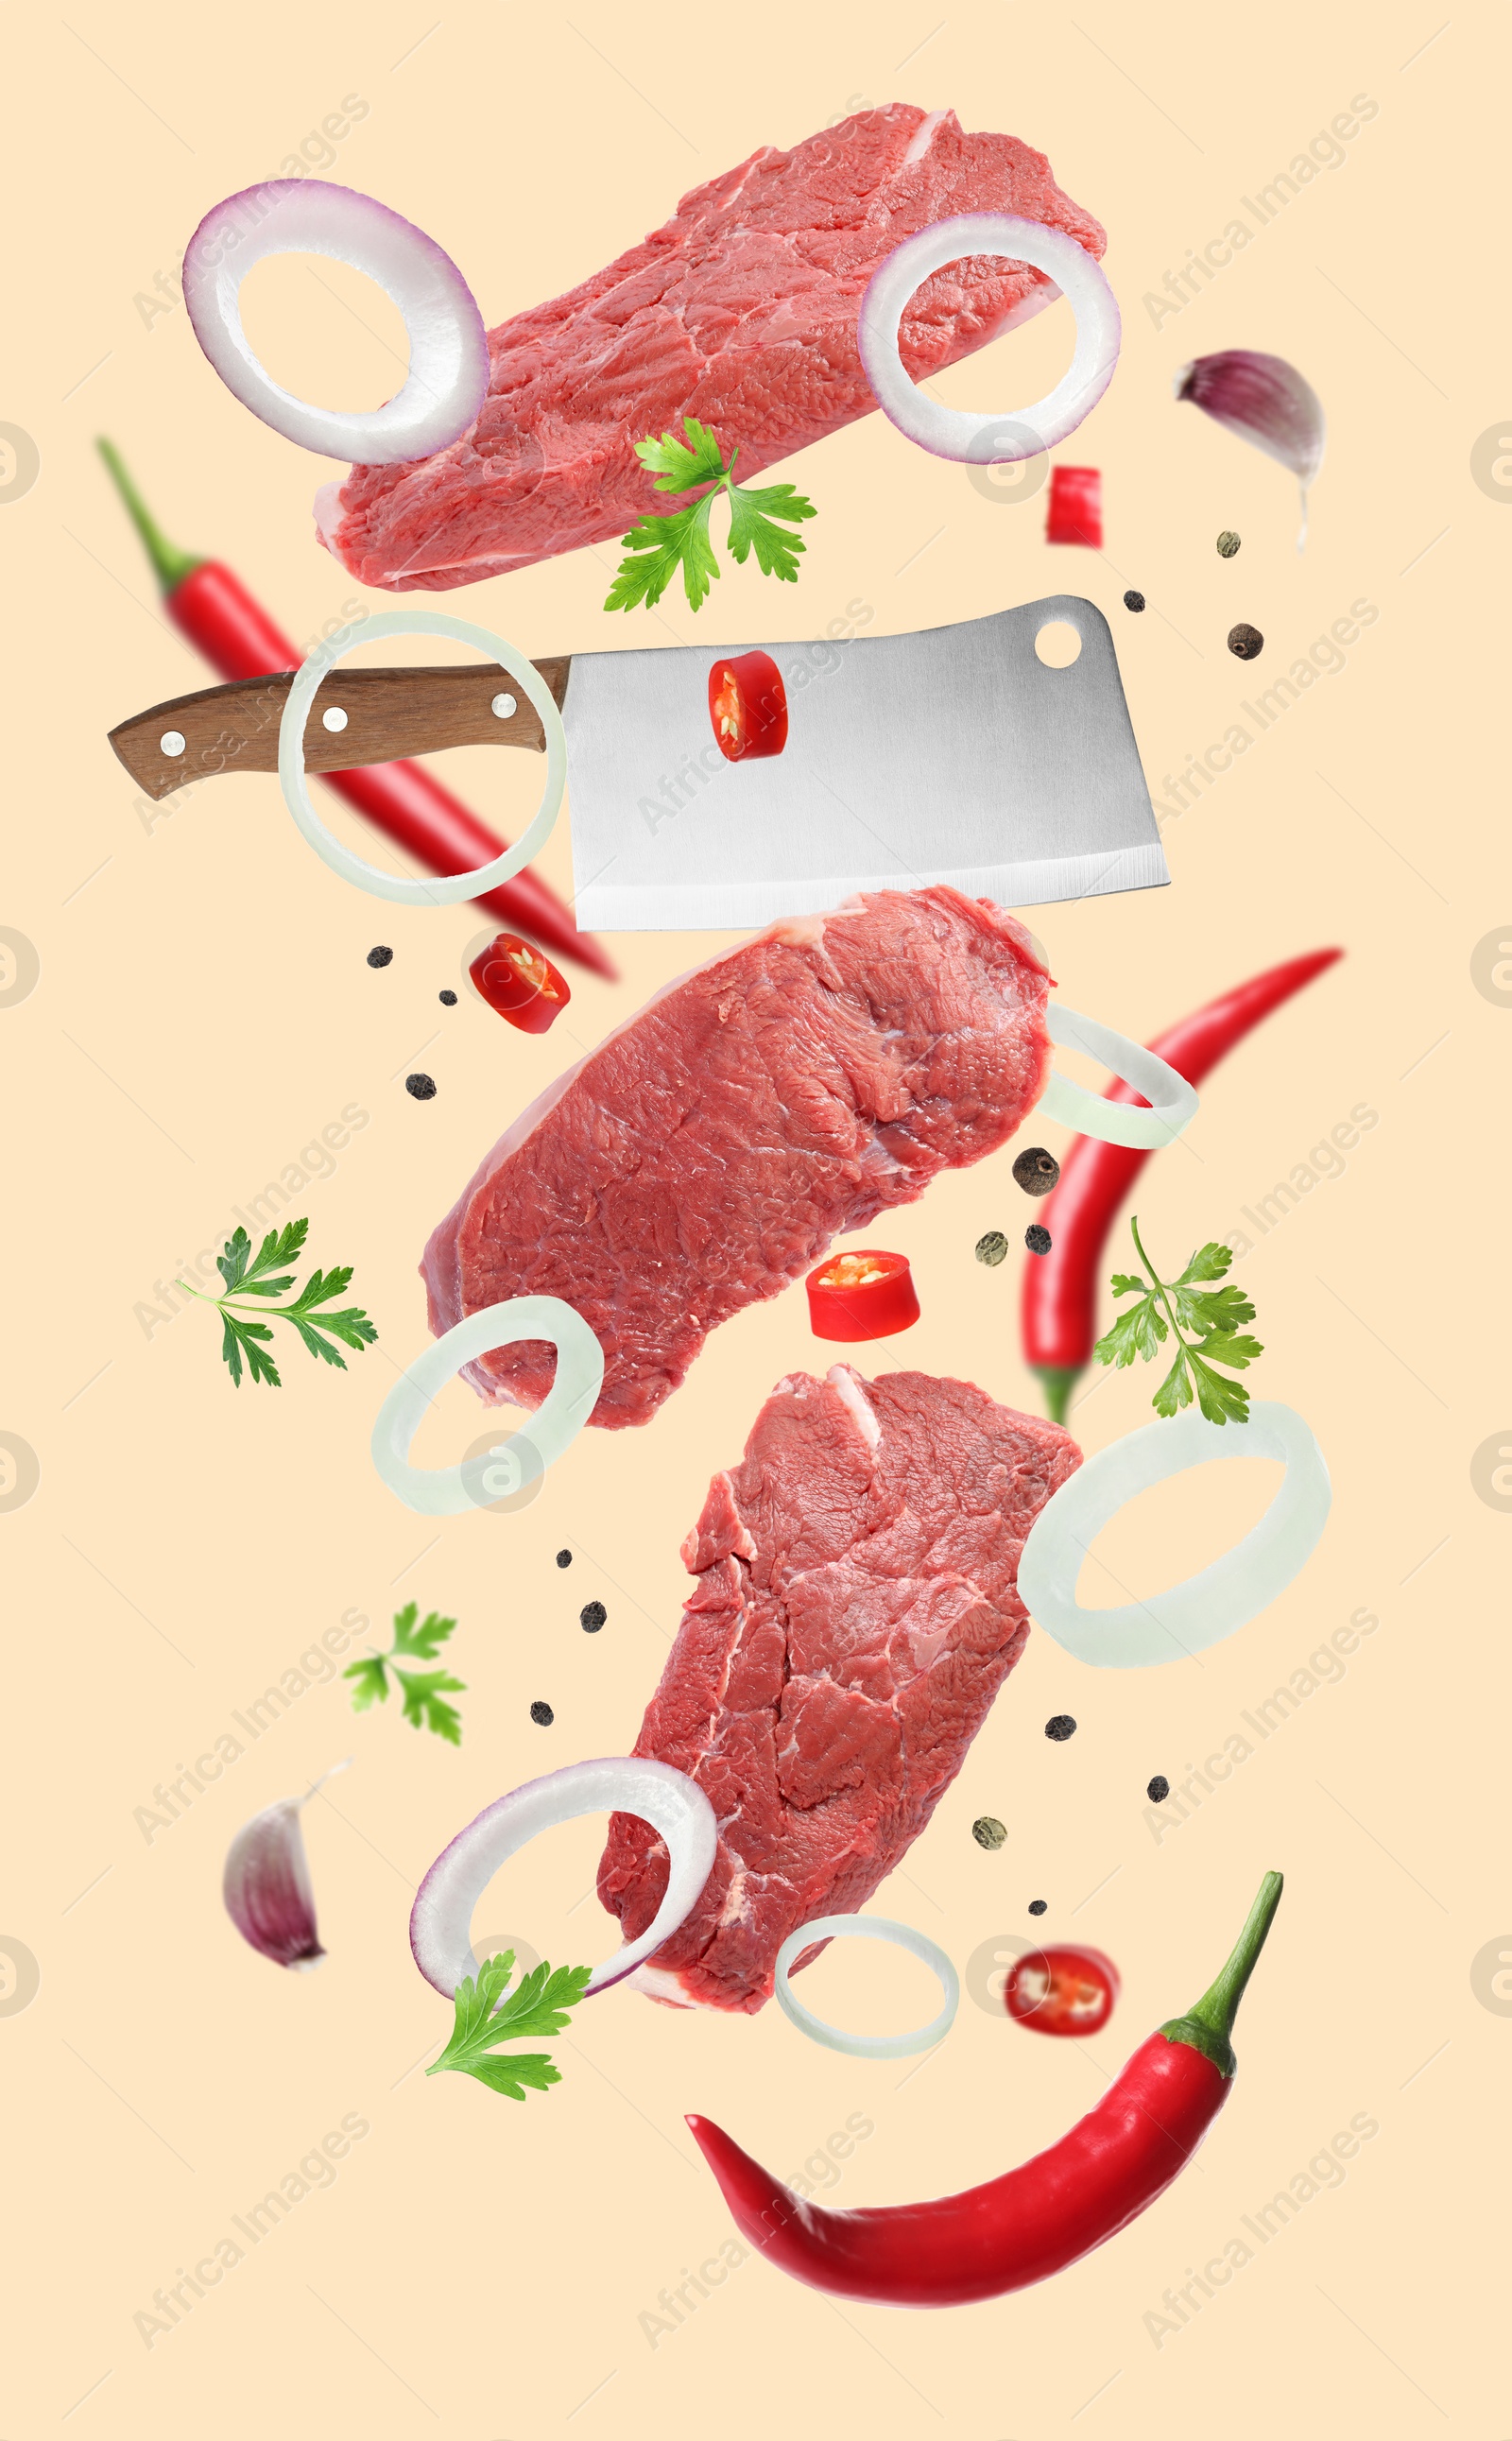 Image of Beef meat, different spices and cleaver knife falling on beige background